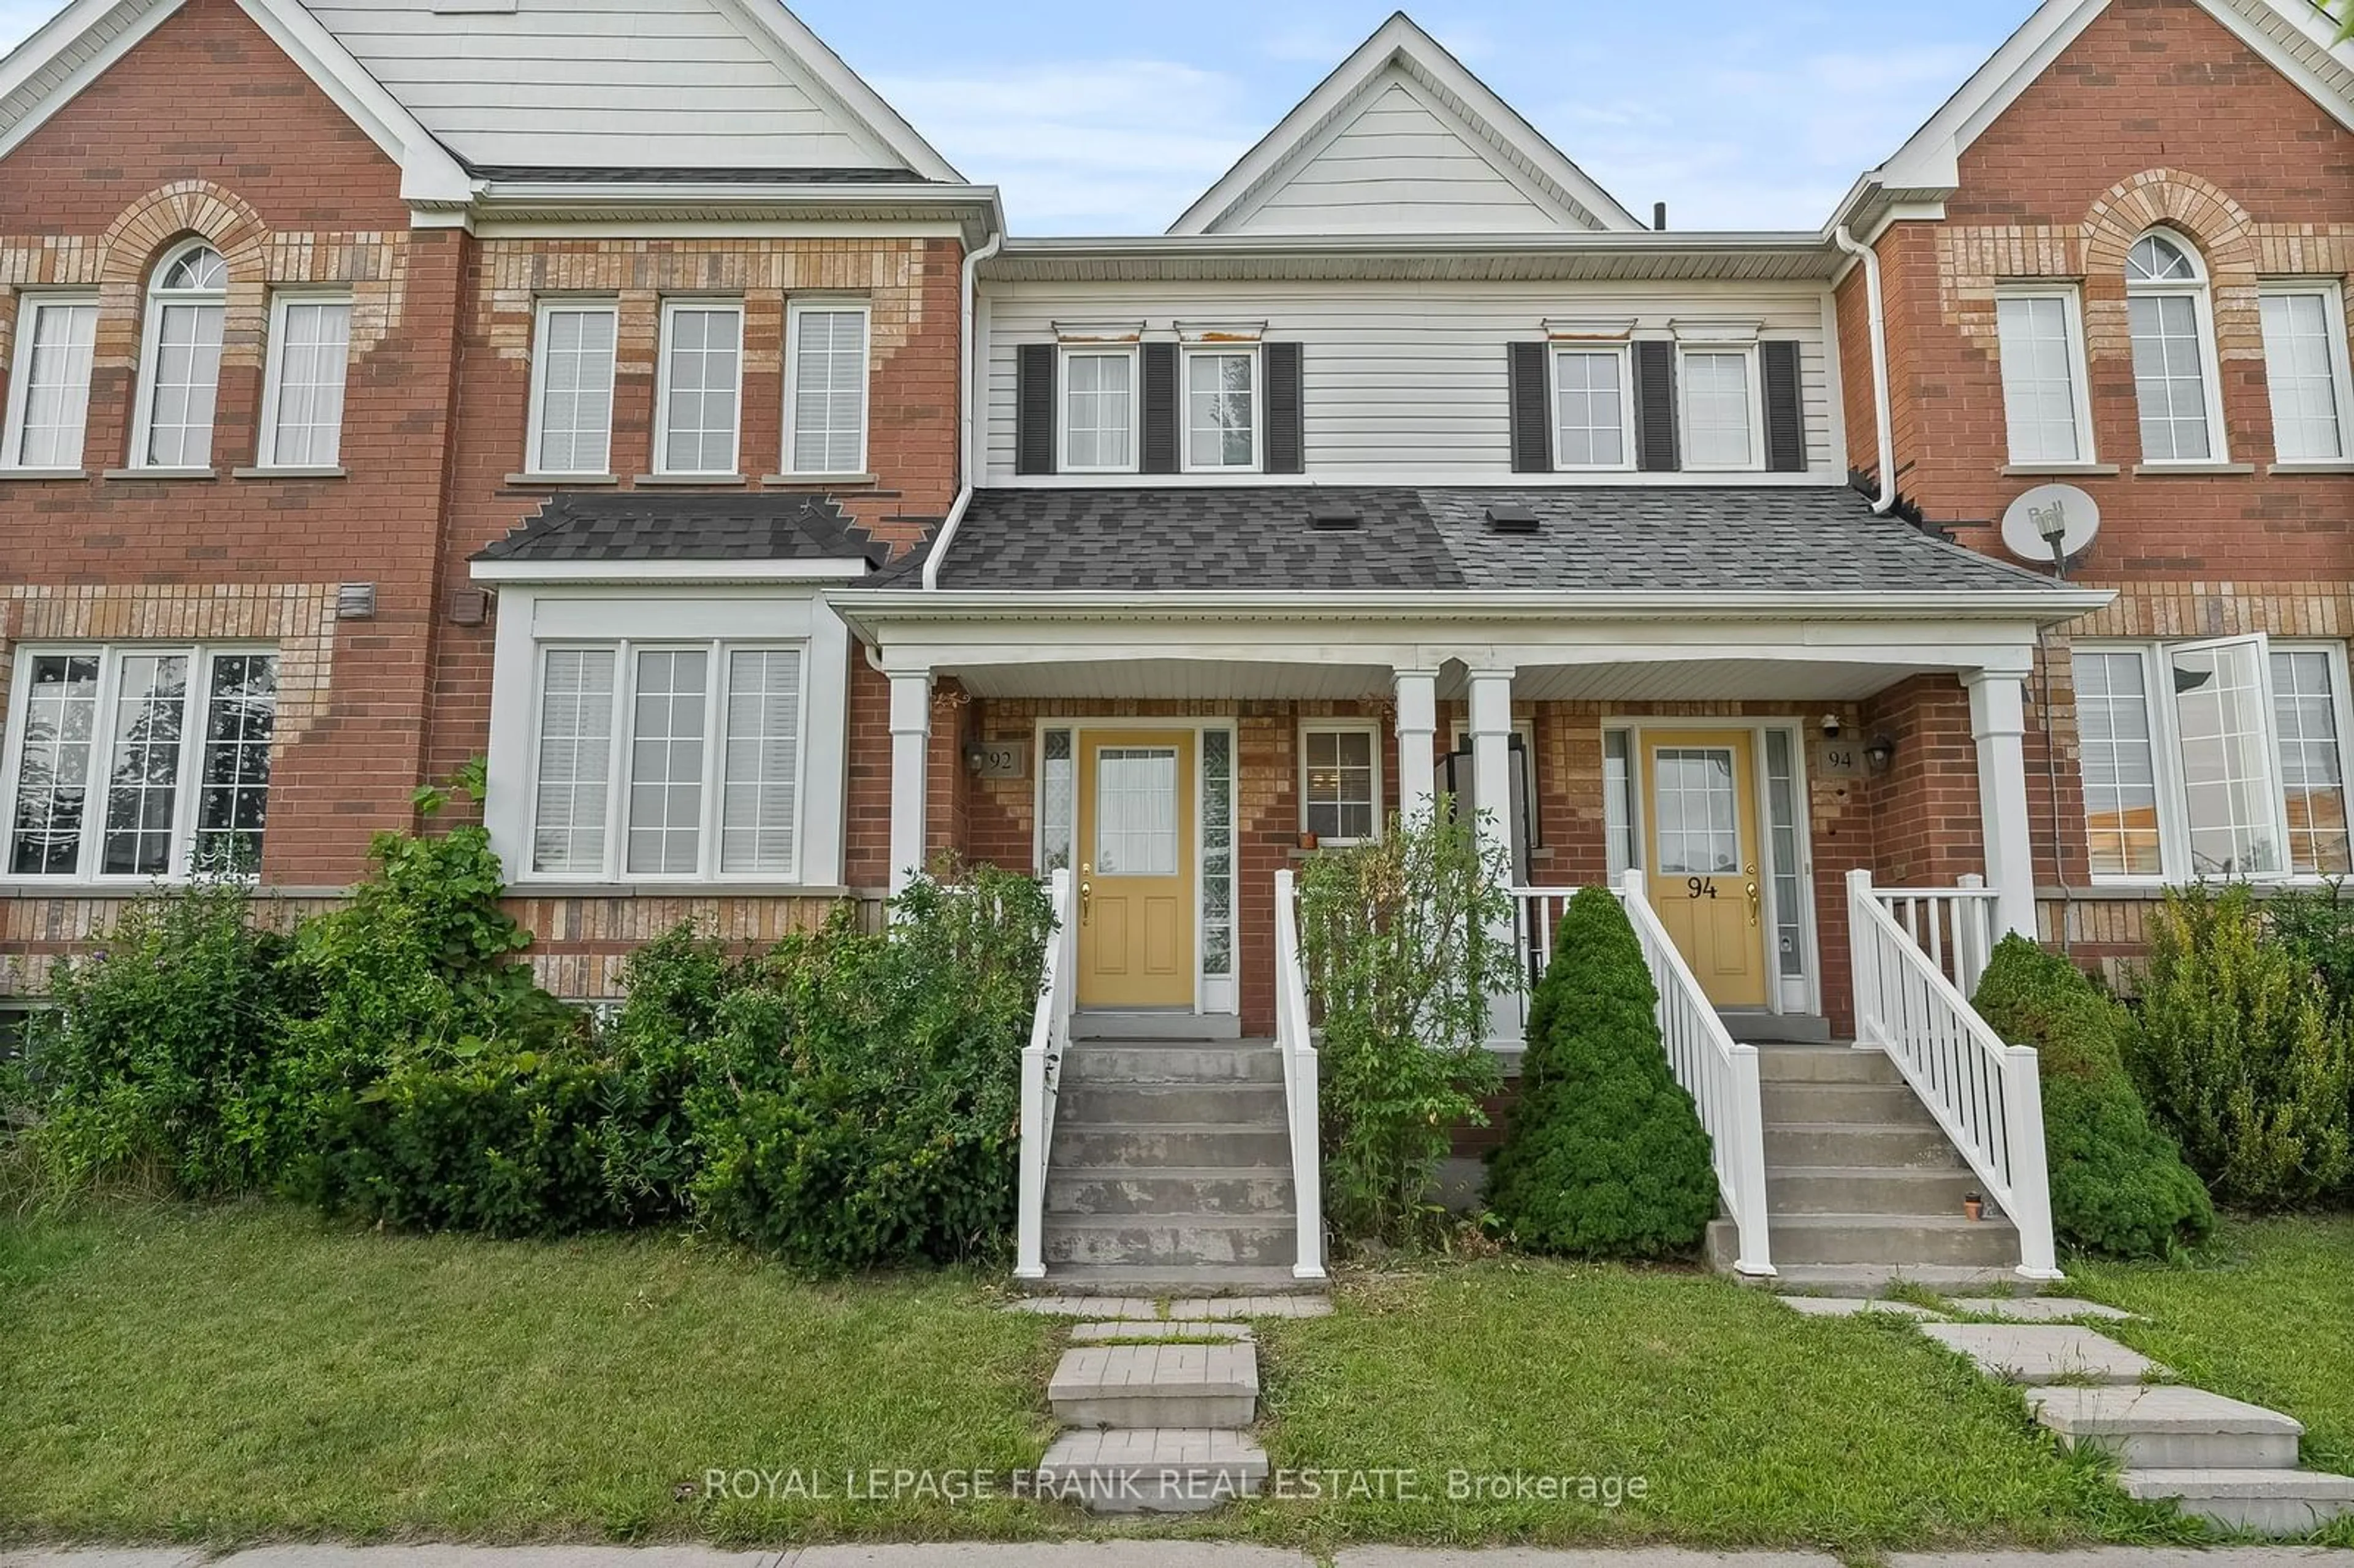 Home with brick exterior material for 92 Williamson Dr, Ajax Ontario L1T 0A5